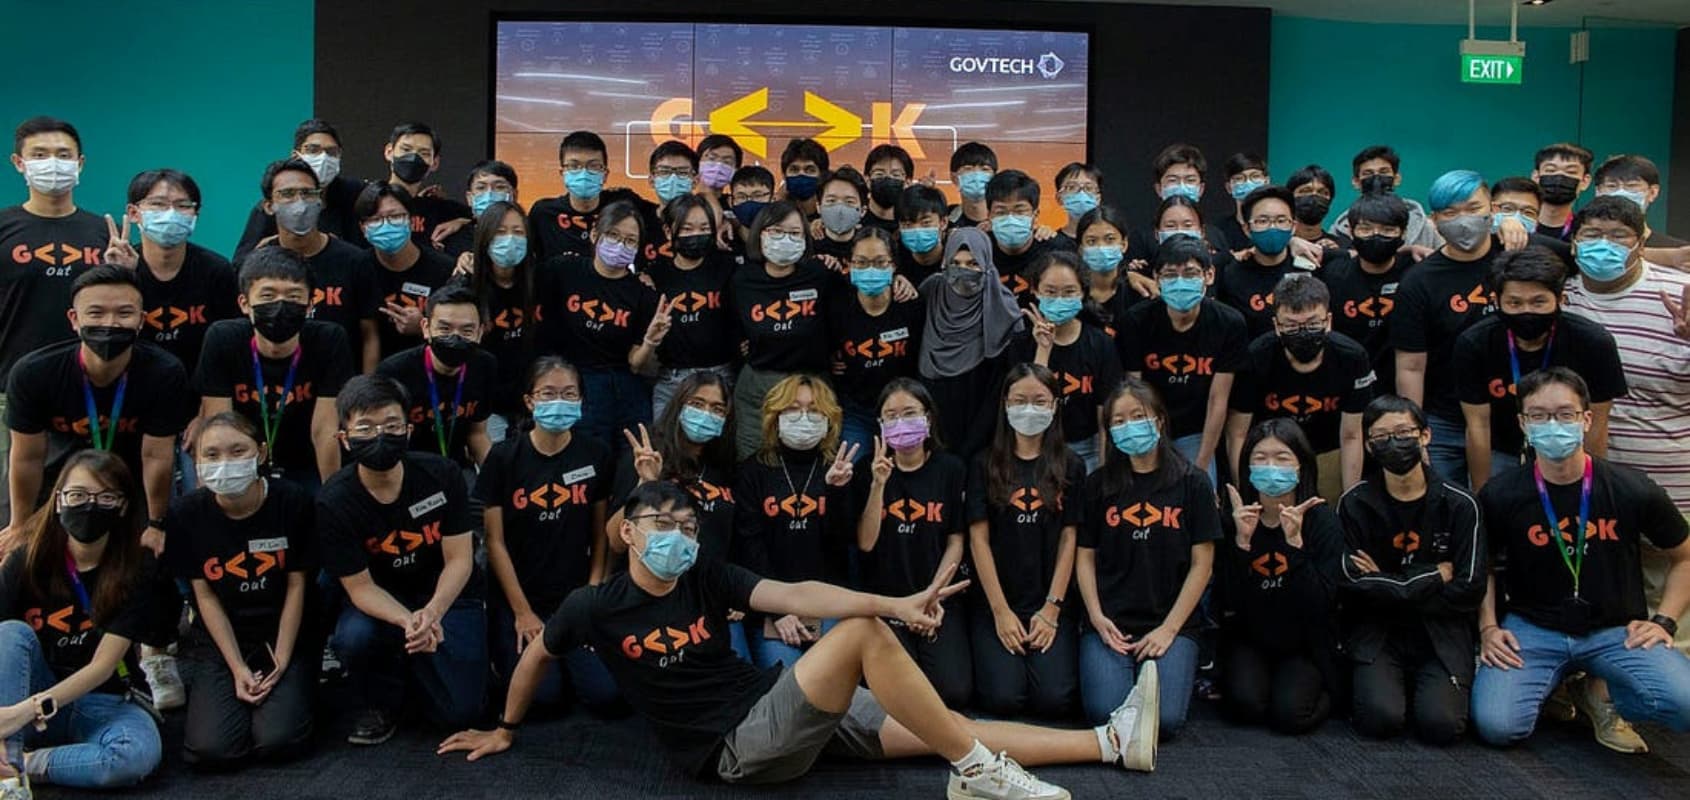 GovTech's GeekOut, a tech bootcamp for students in Singapore